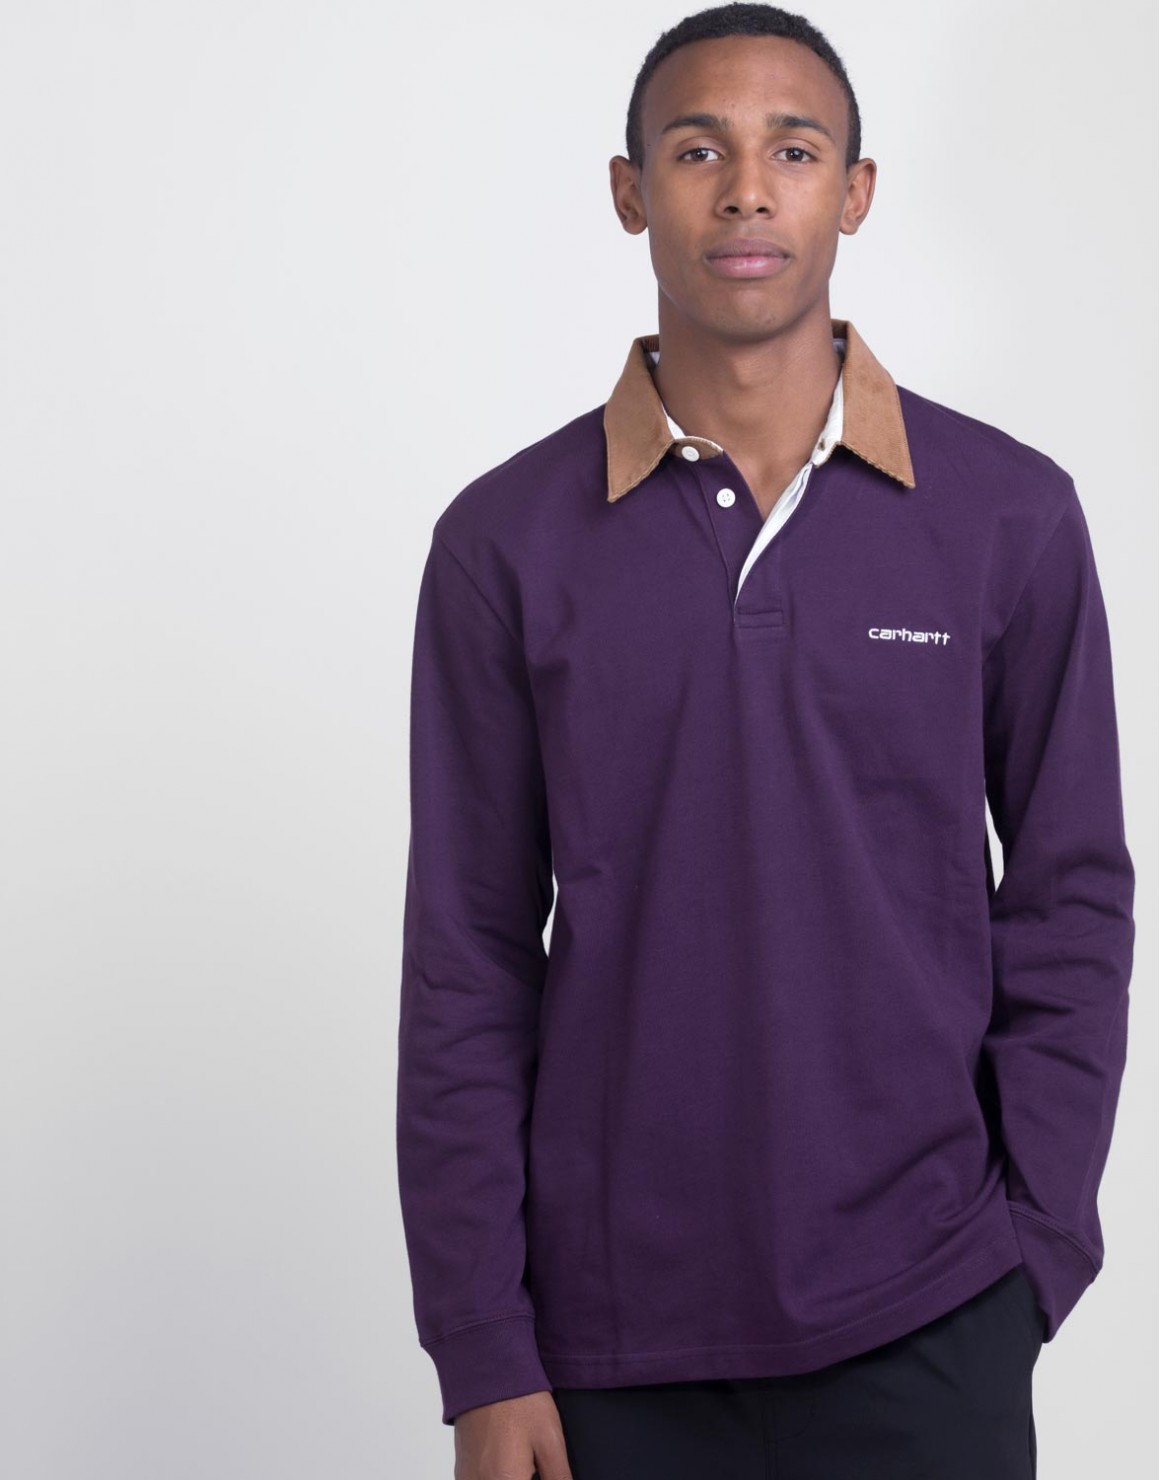 L/S Cord Rugby Polo